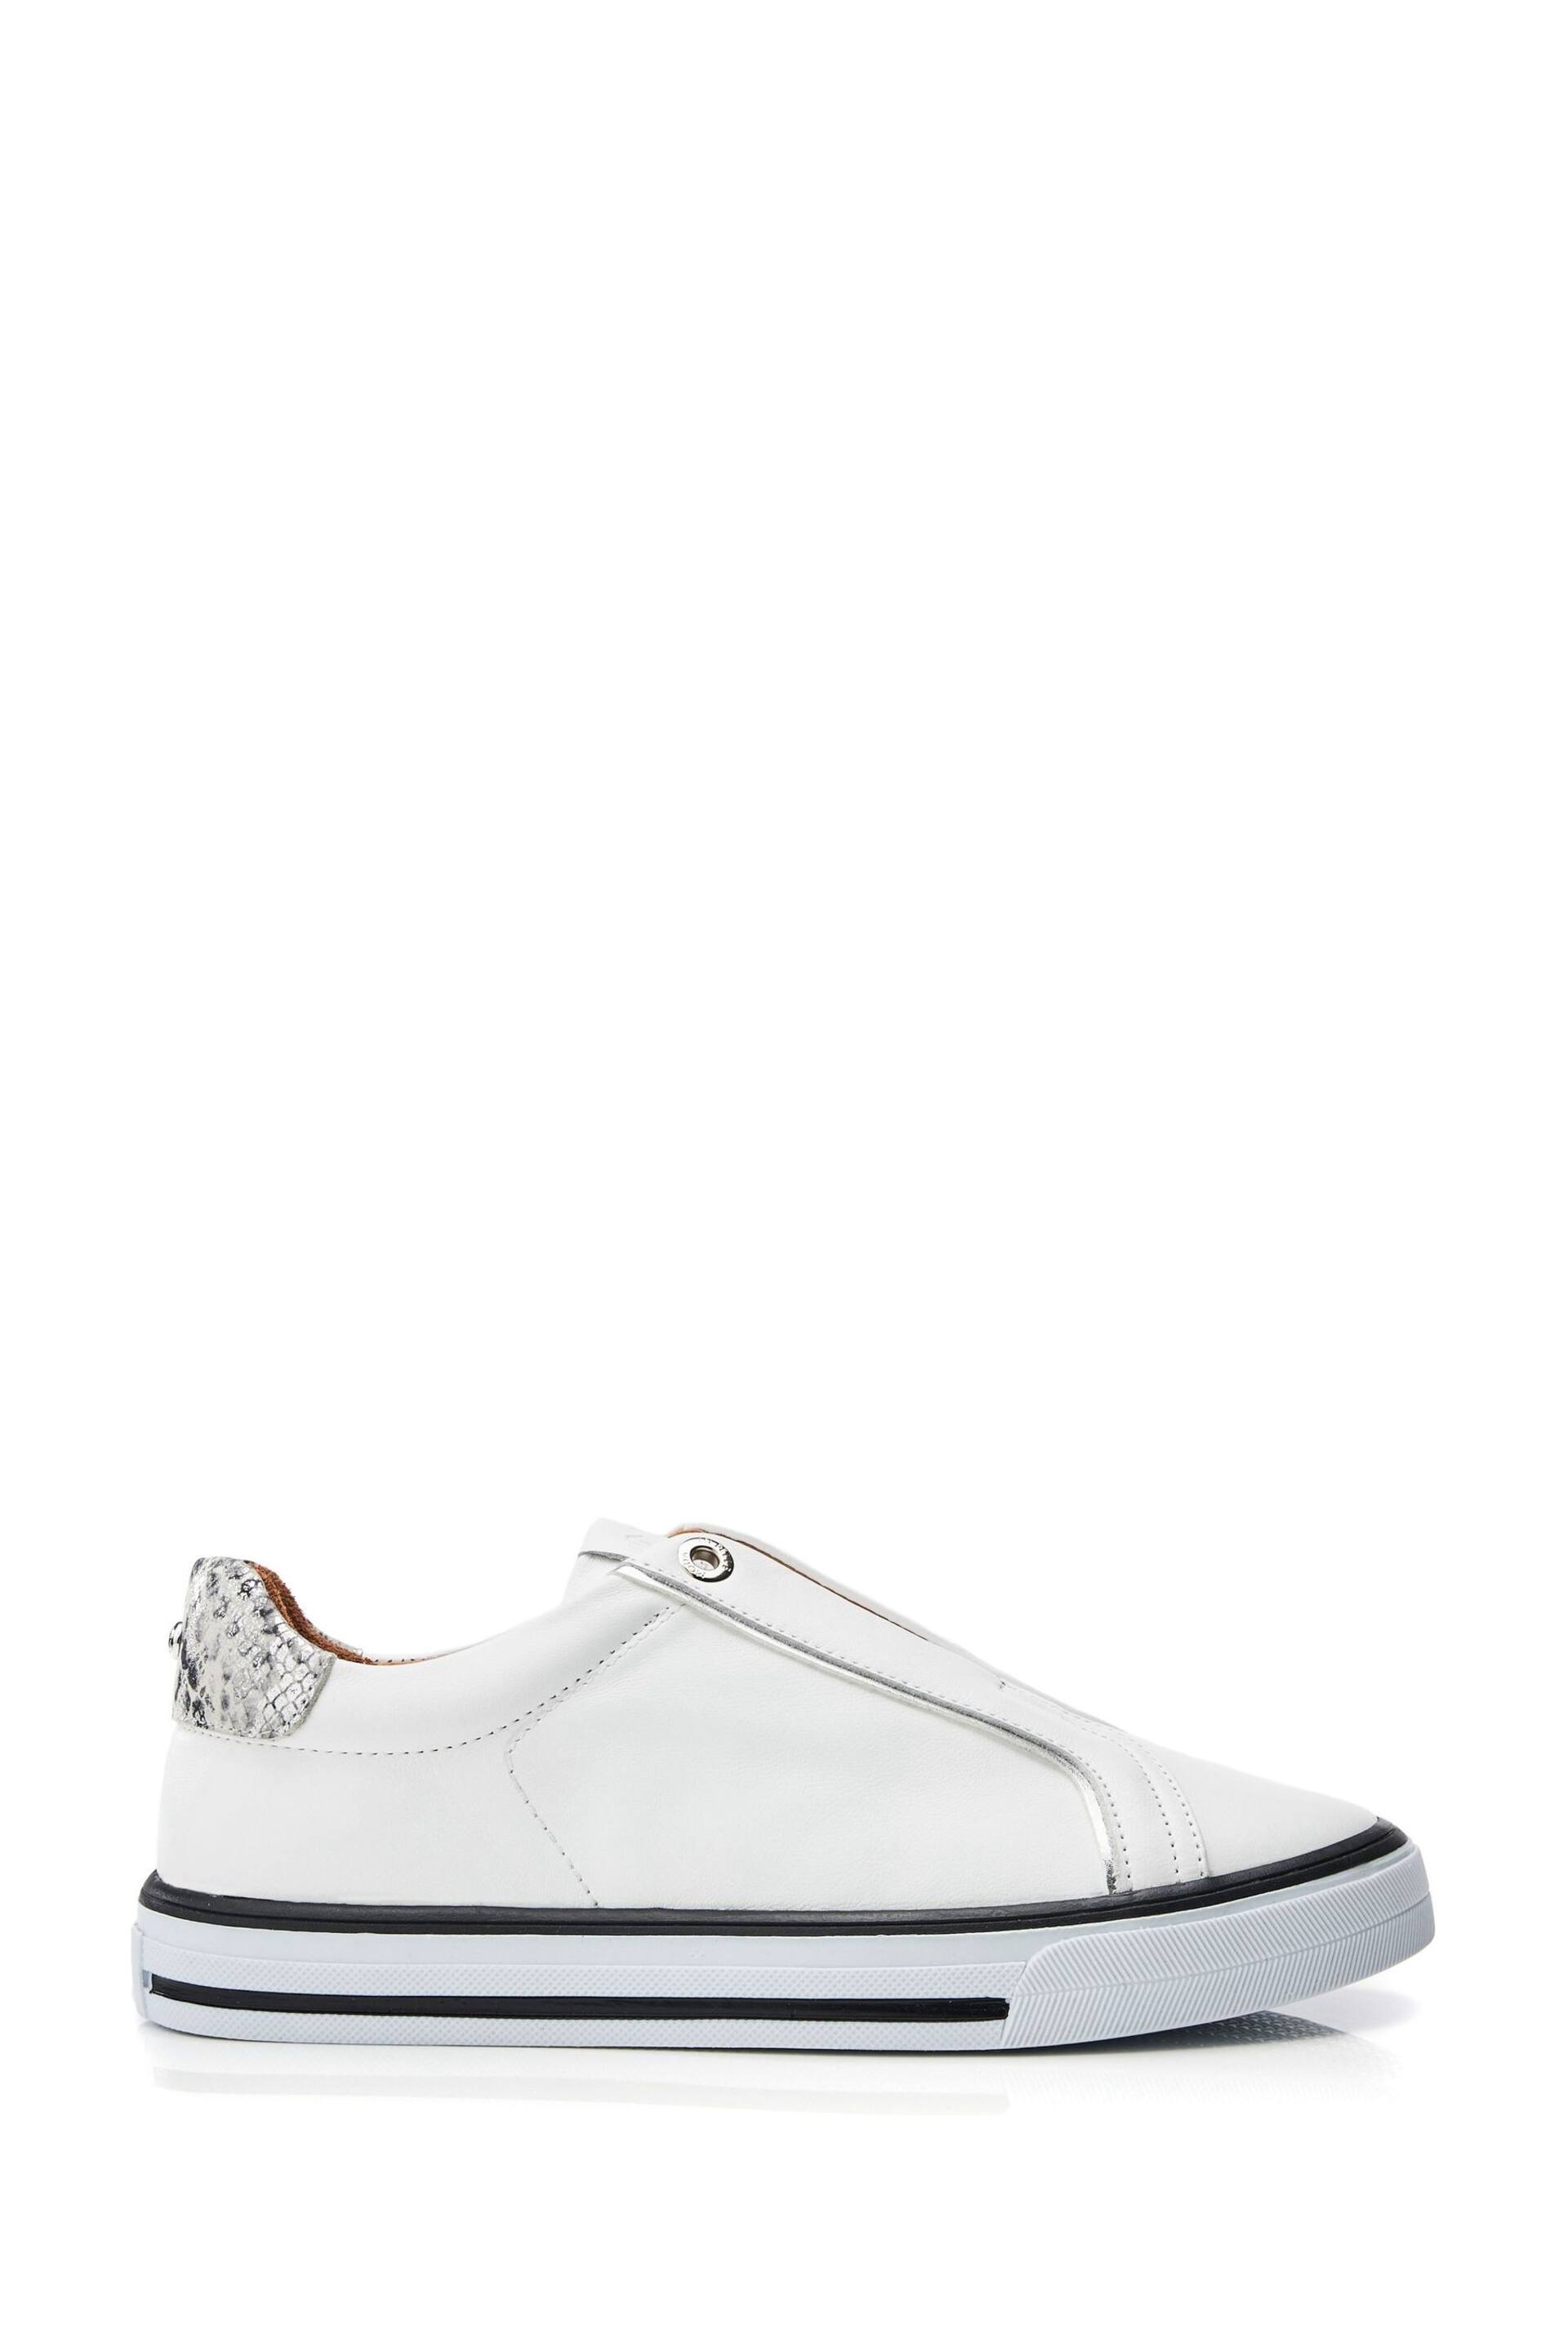 Moda in Pelle Bennii Elastic White Slip-Ons With Foxing Sole - Image 4 of 4